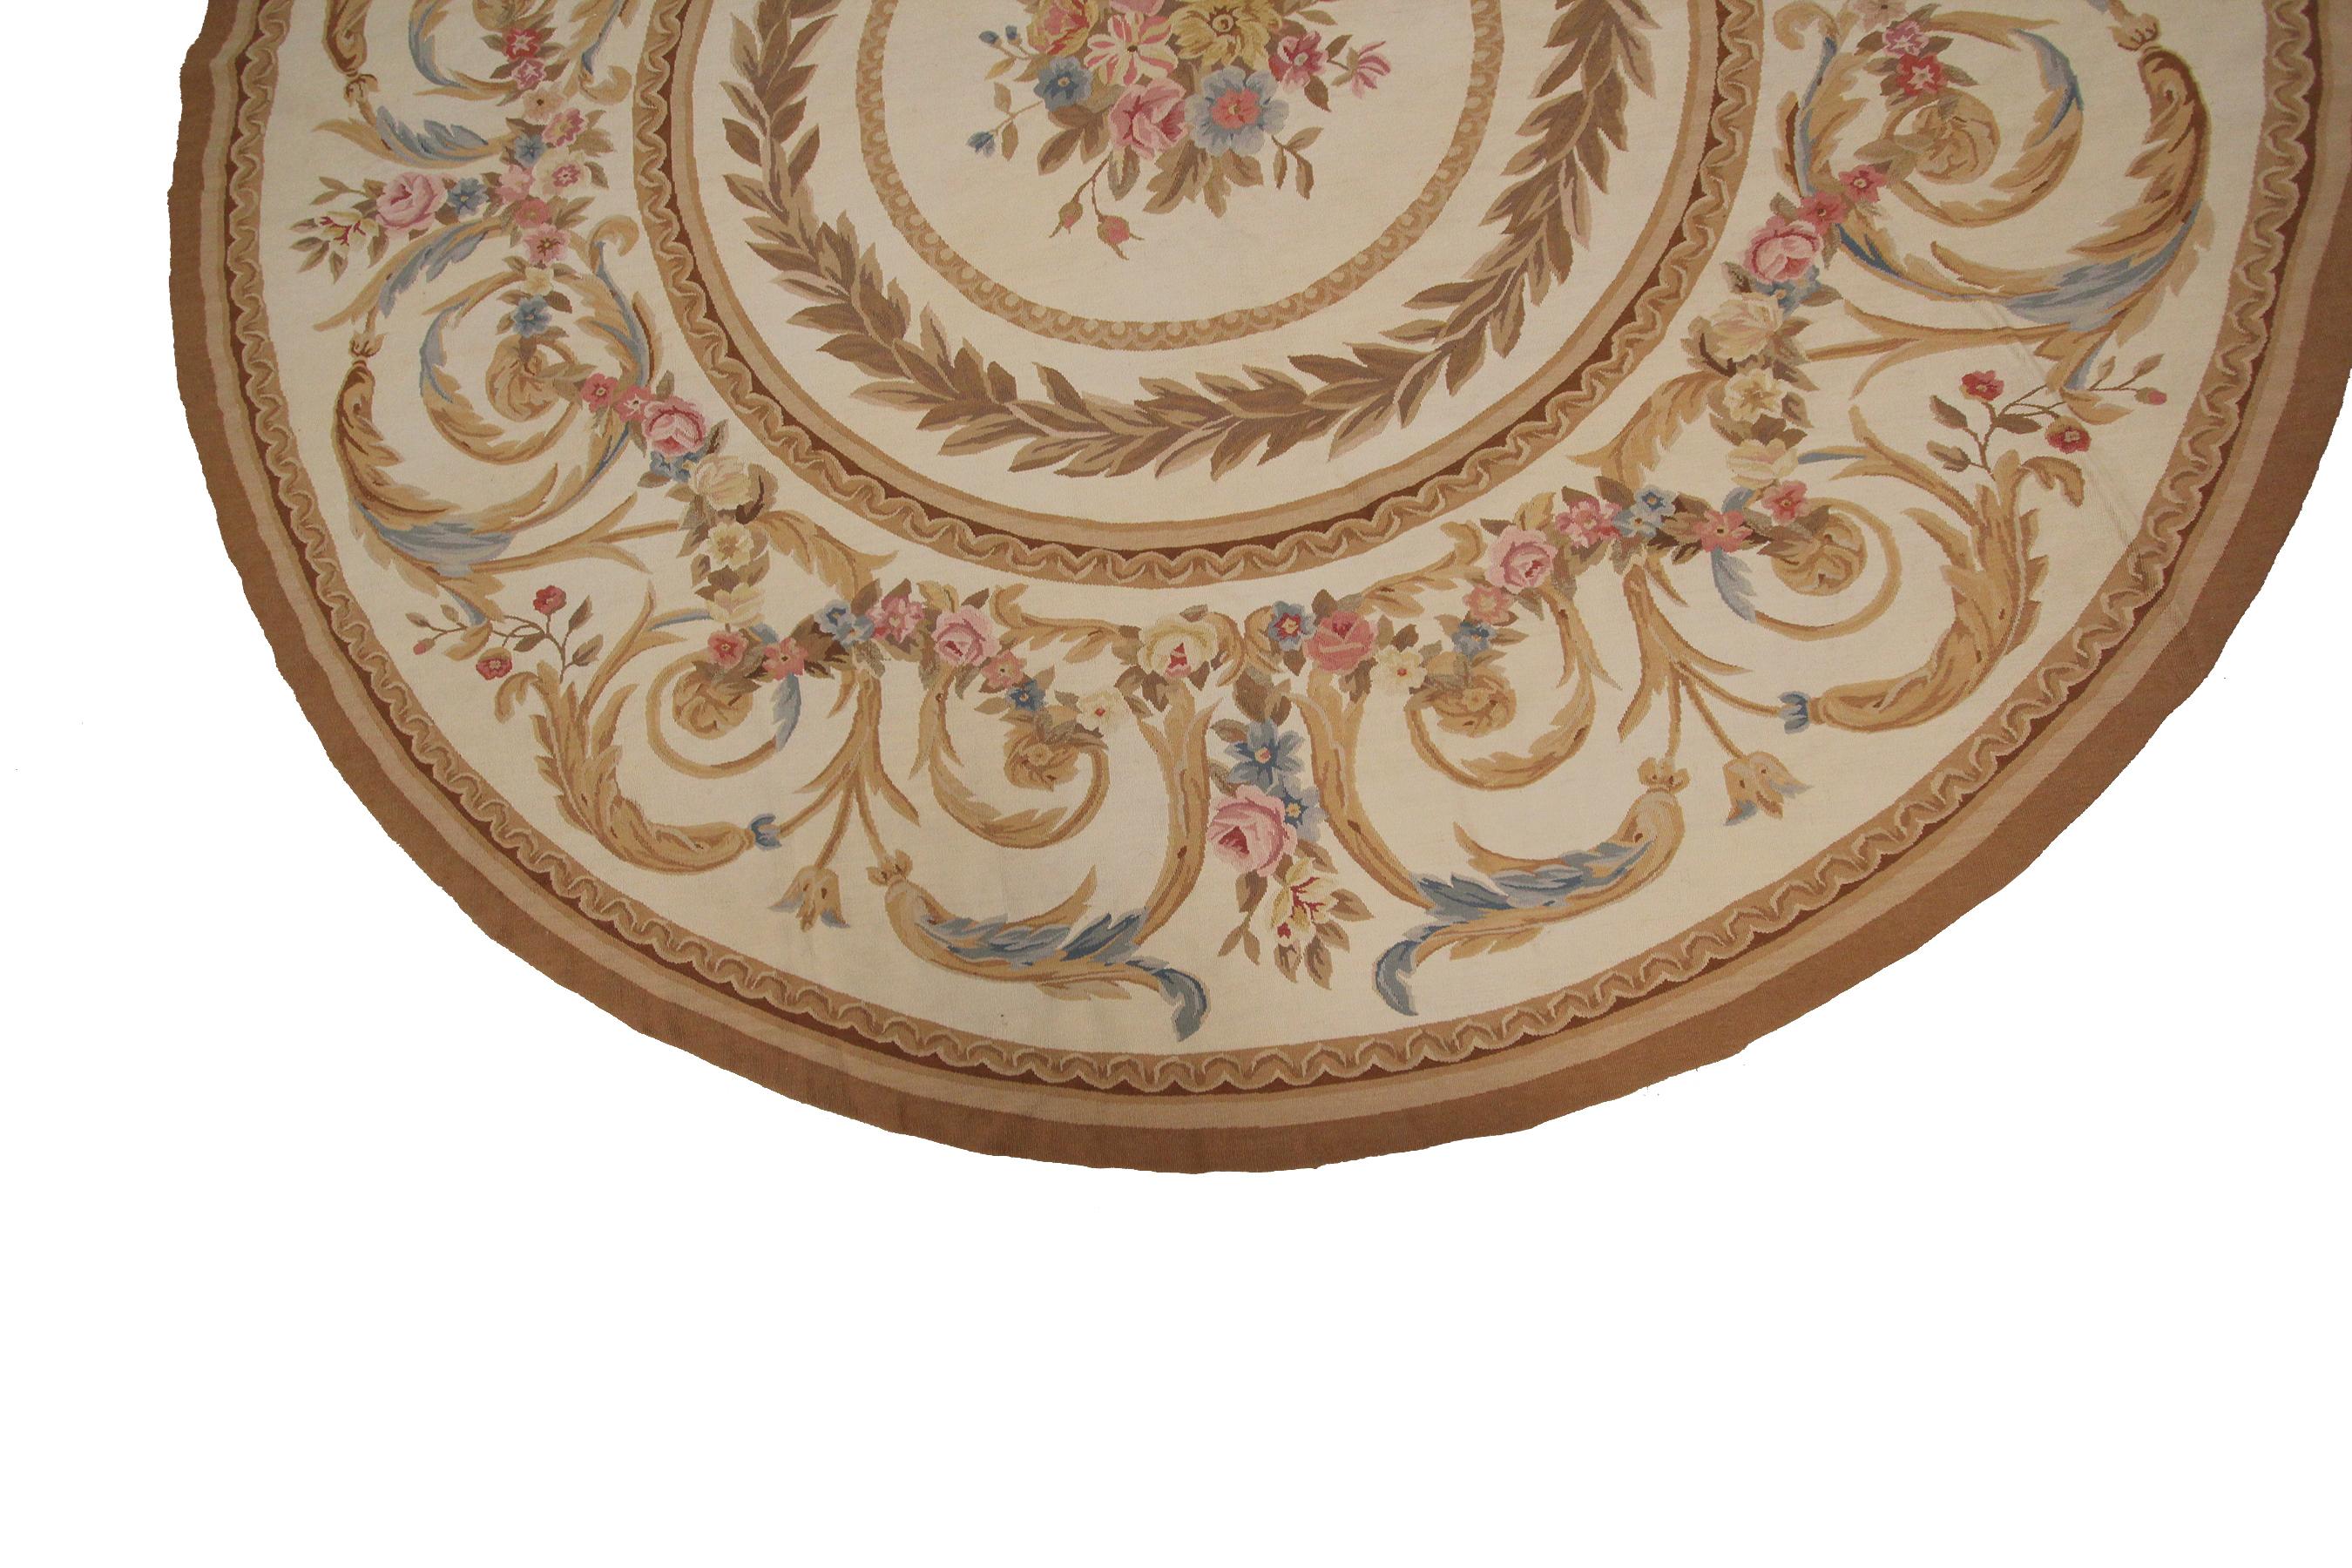 Wool Antique French Aubusson Rug Hand Woven Aubusson Rug 8x8 Round Rug 244cm x 244cm For Sale